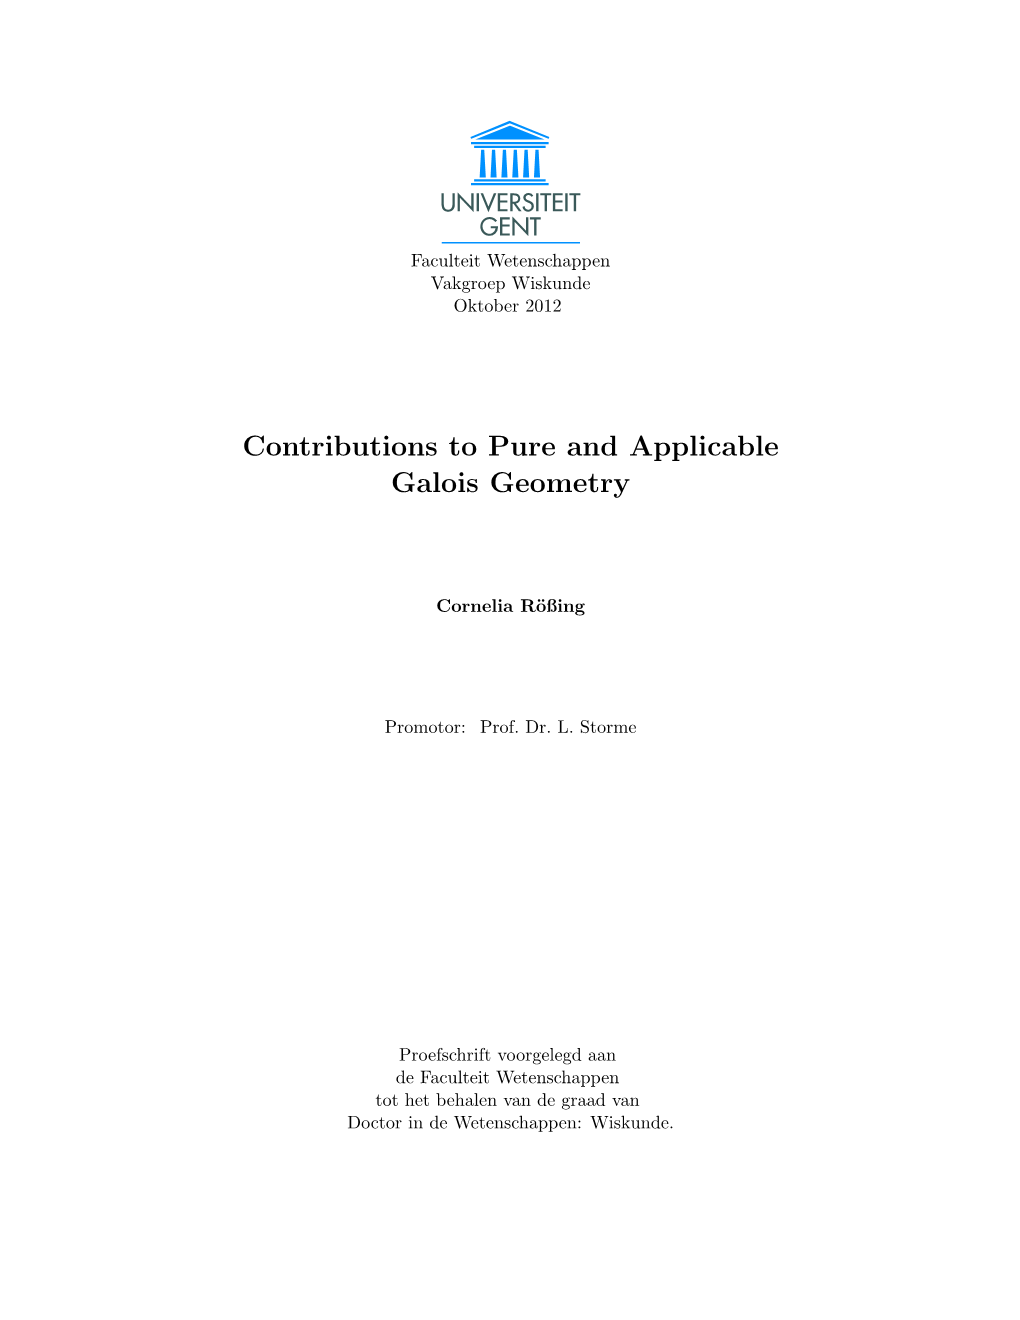 Contributions to Pure and Applicable Galois Geometry